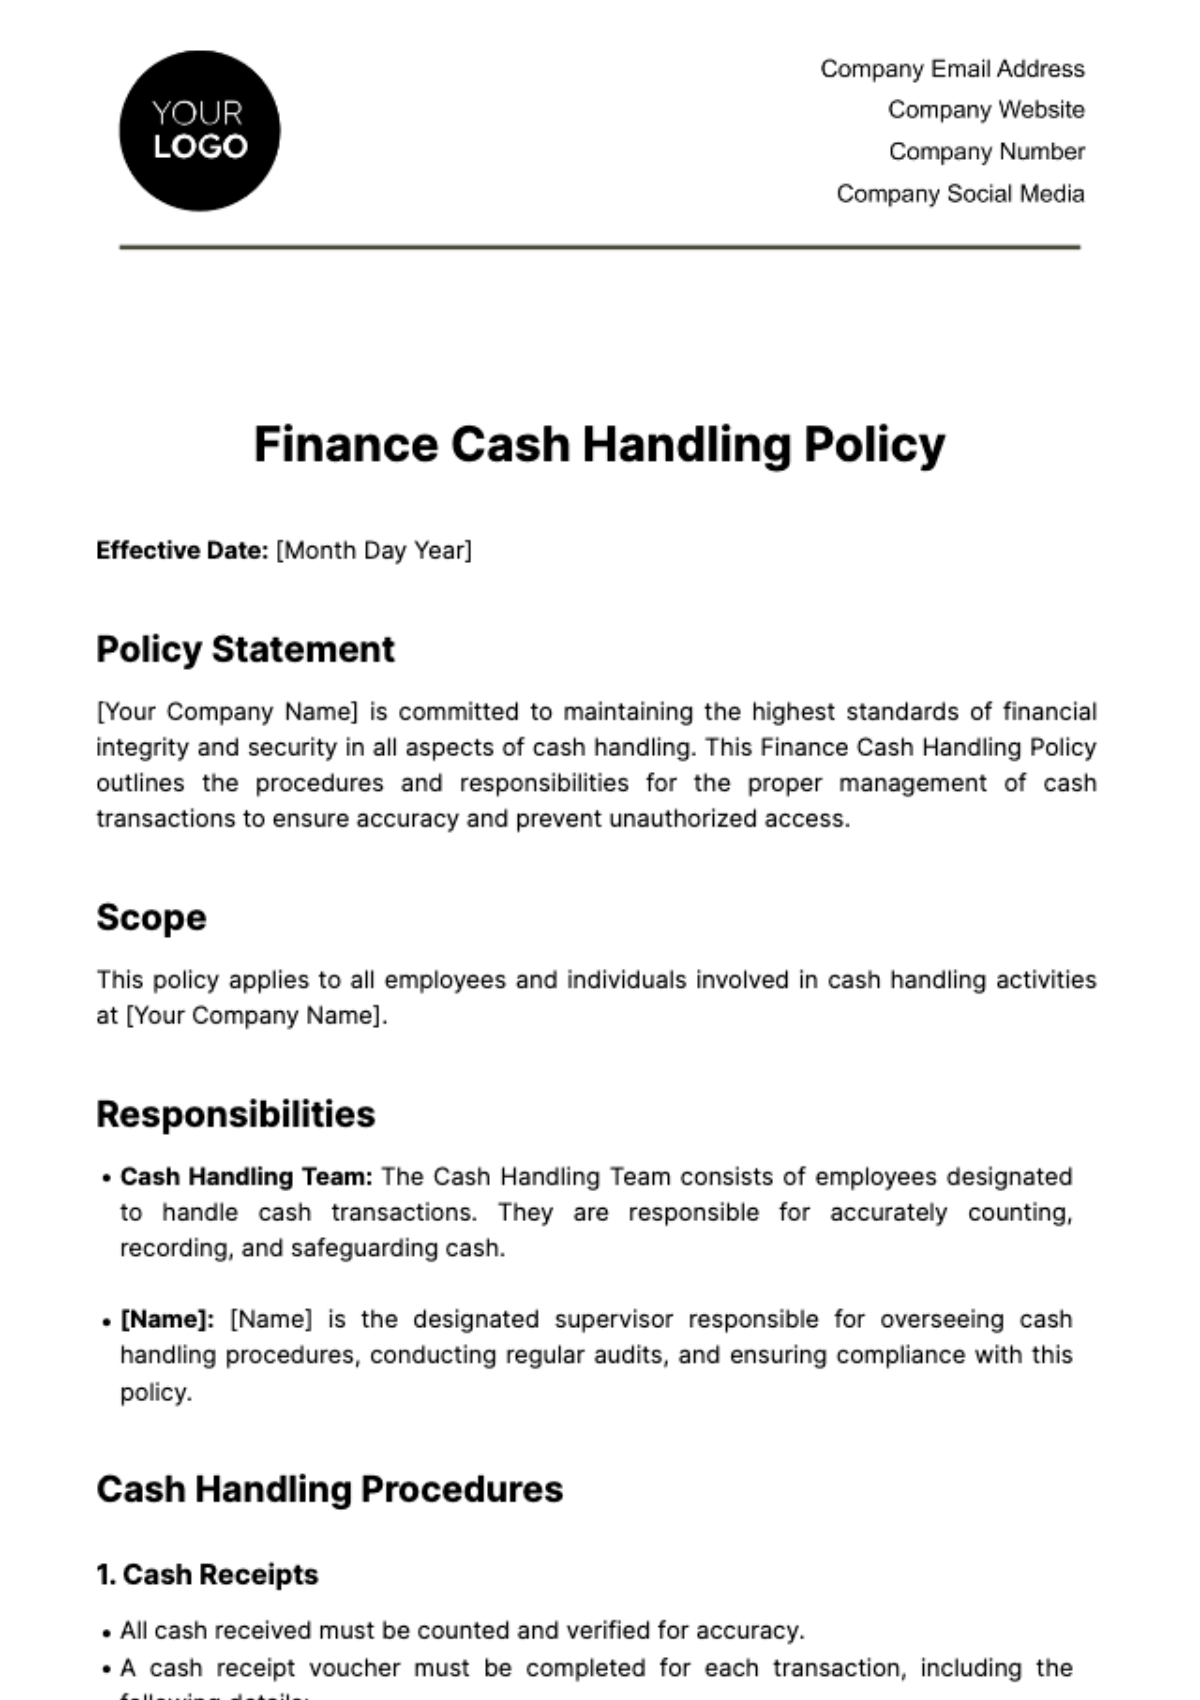 Free Finance Cash Handling Policy Template